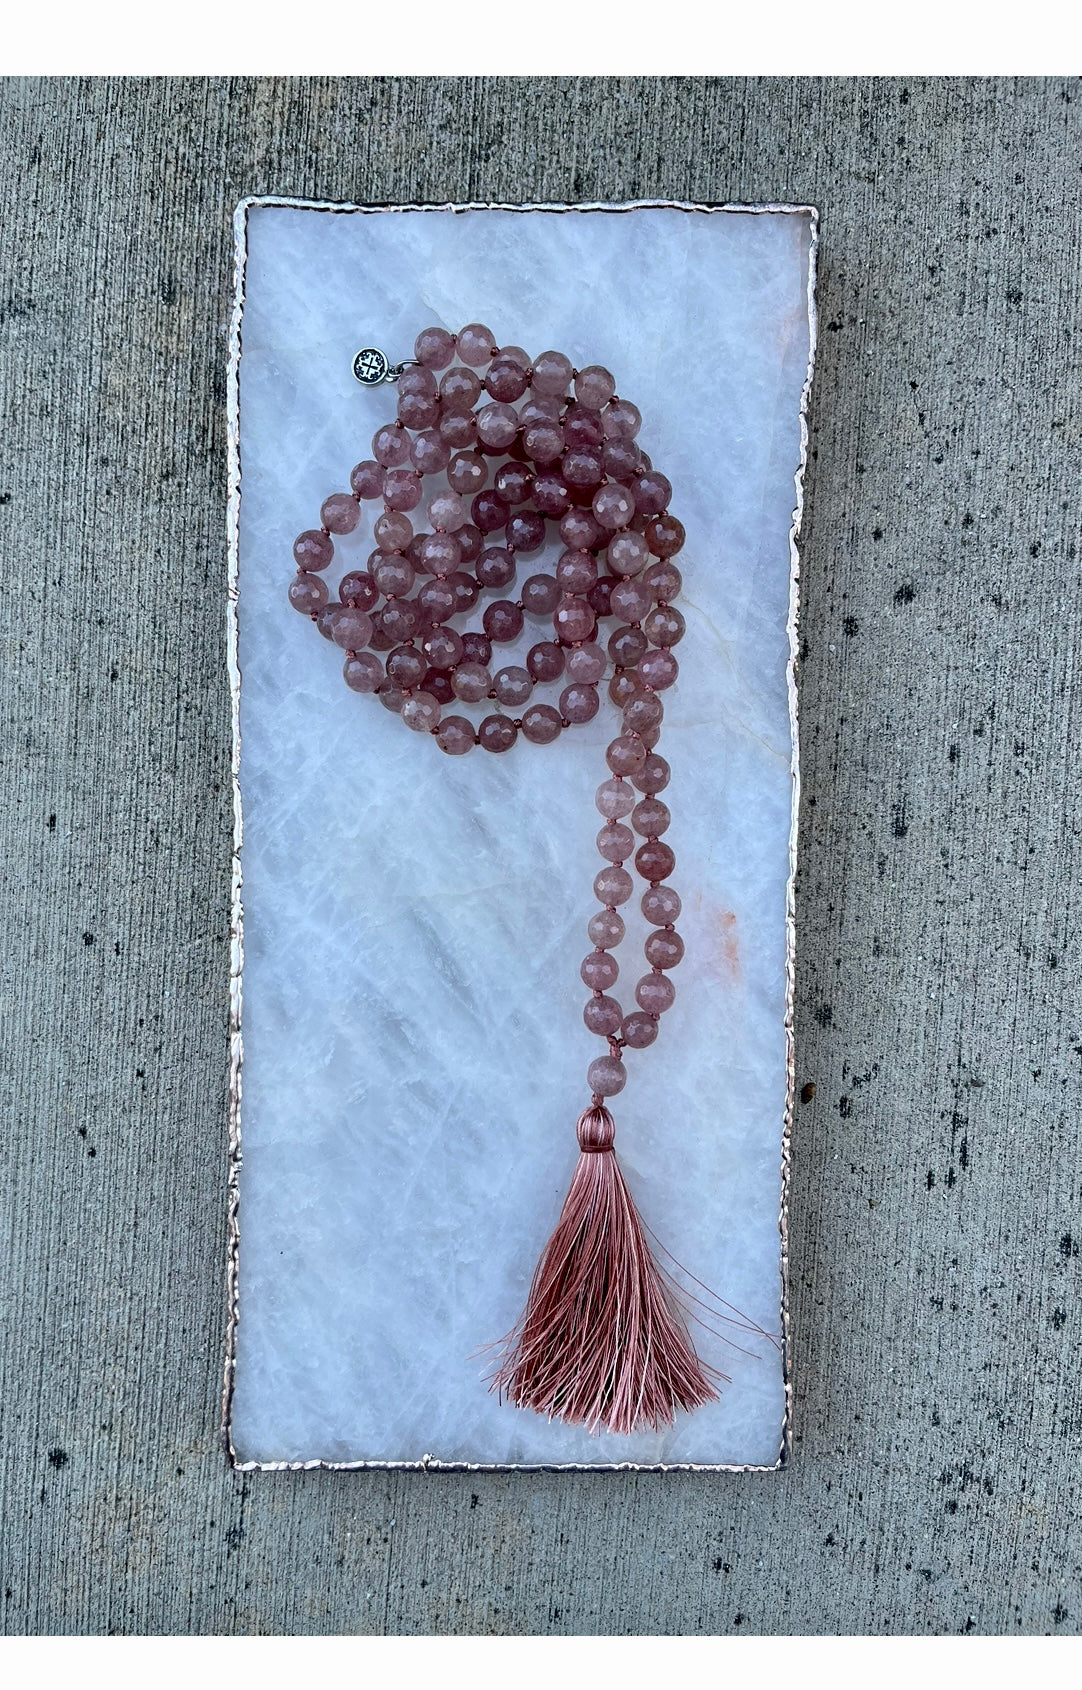 VITALITY: Ruby Quartz Faceted 108 bead Hand-knotted Mala 8mm